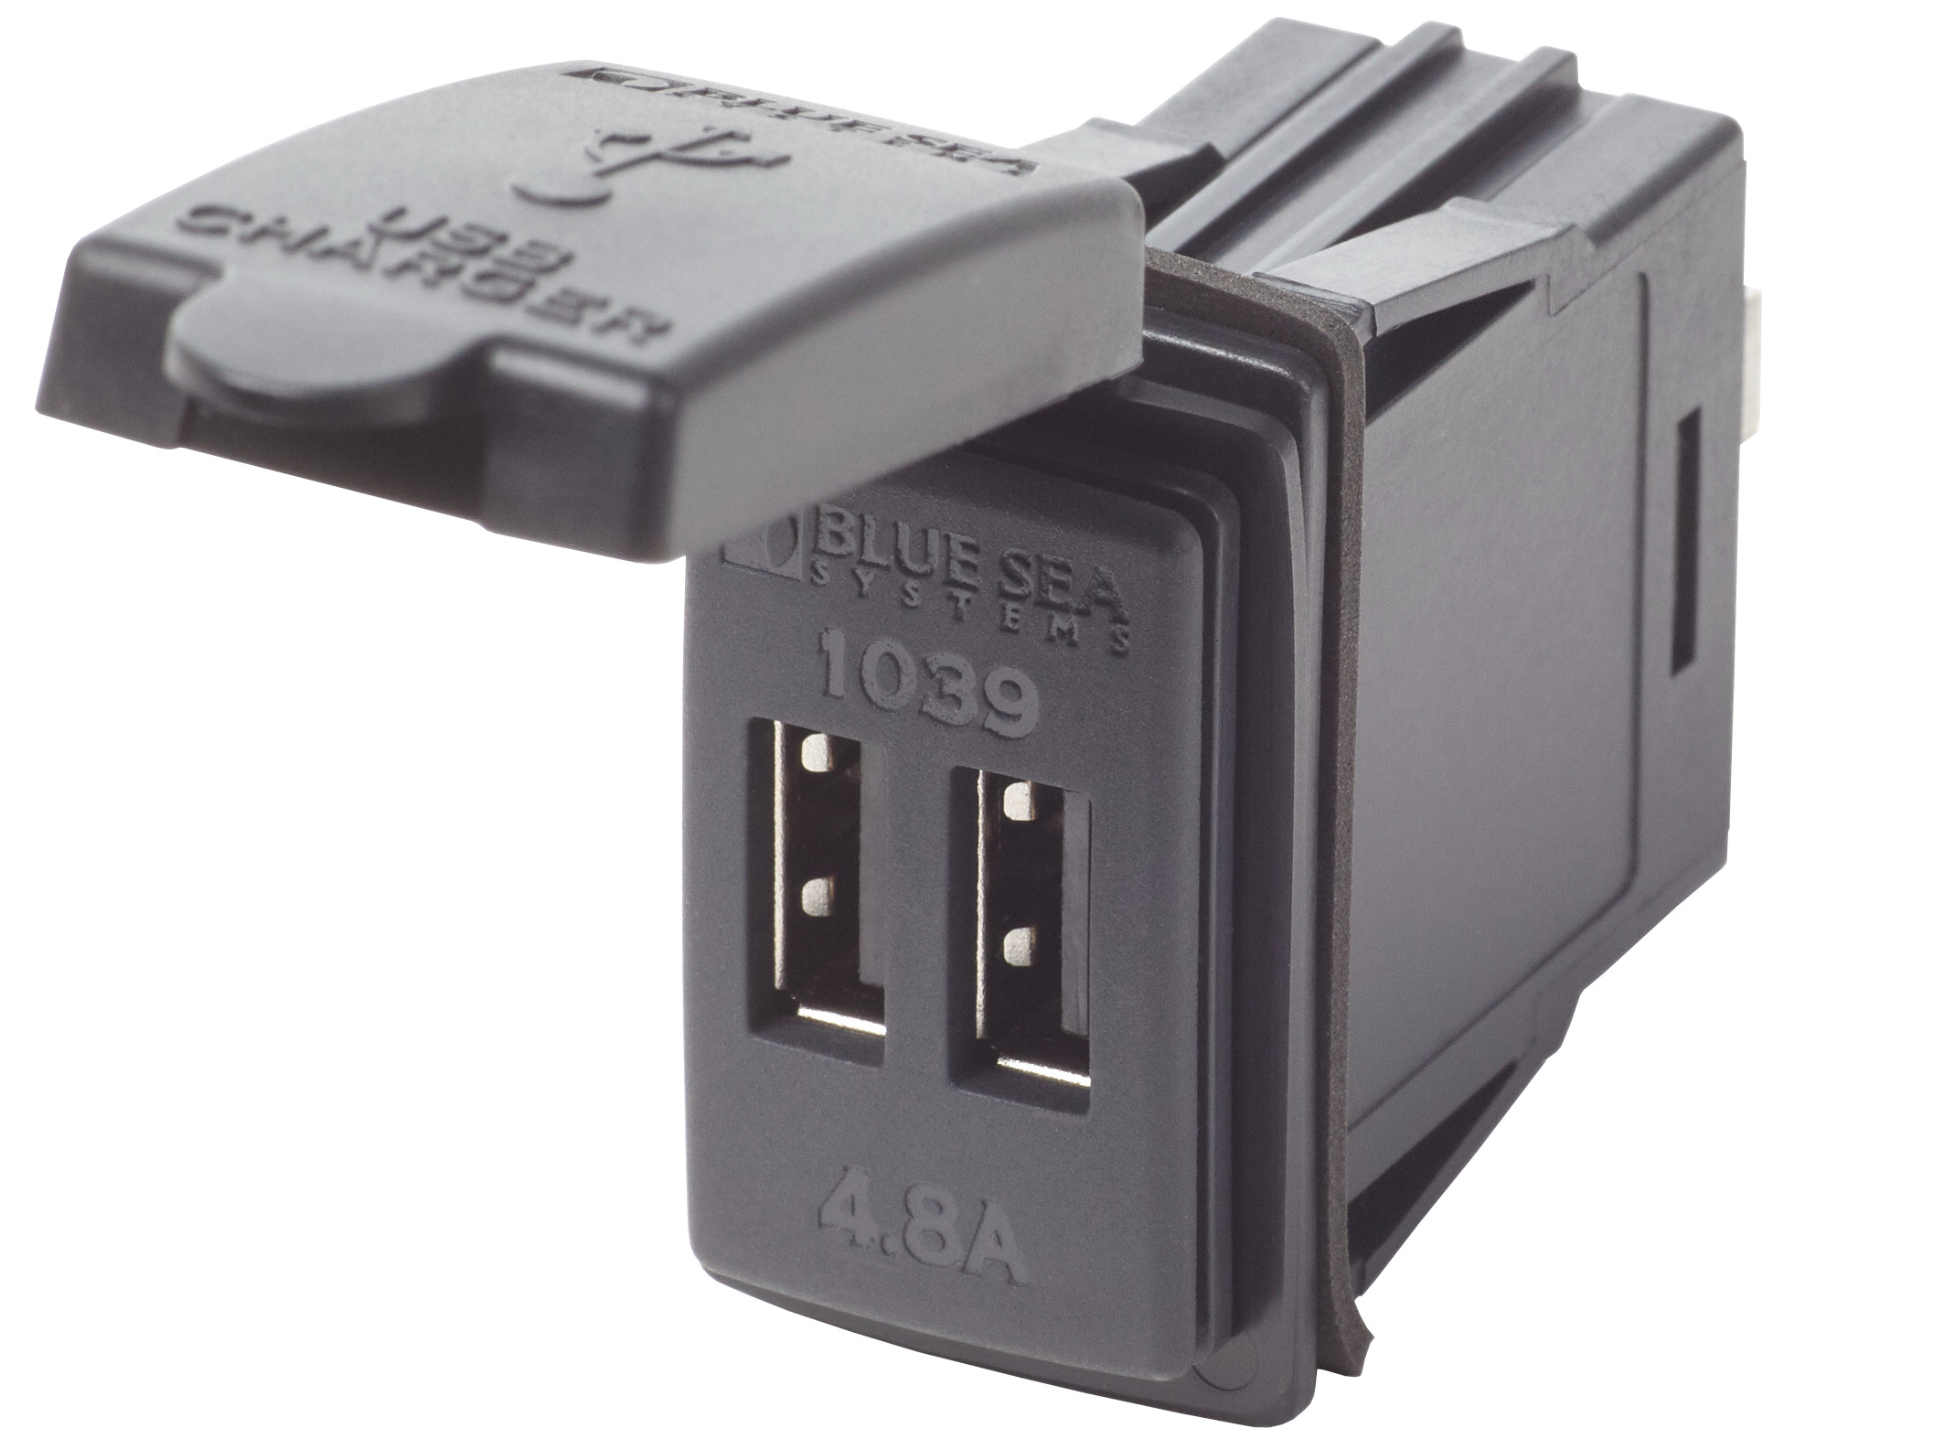 12/24V Dual USB 4.8A Chargers - Switch Mount